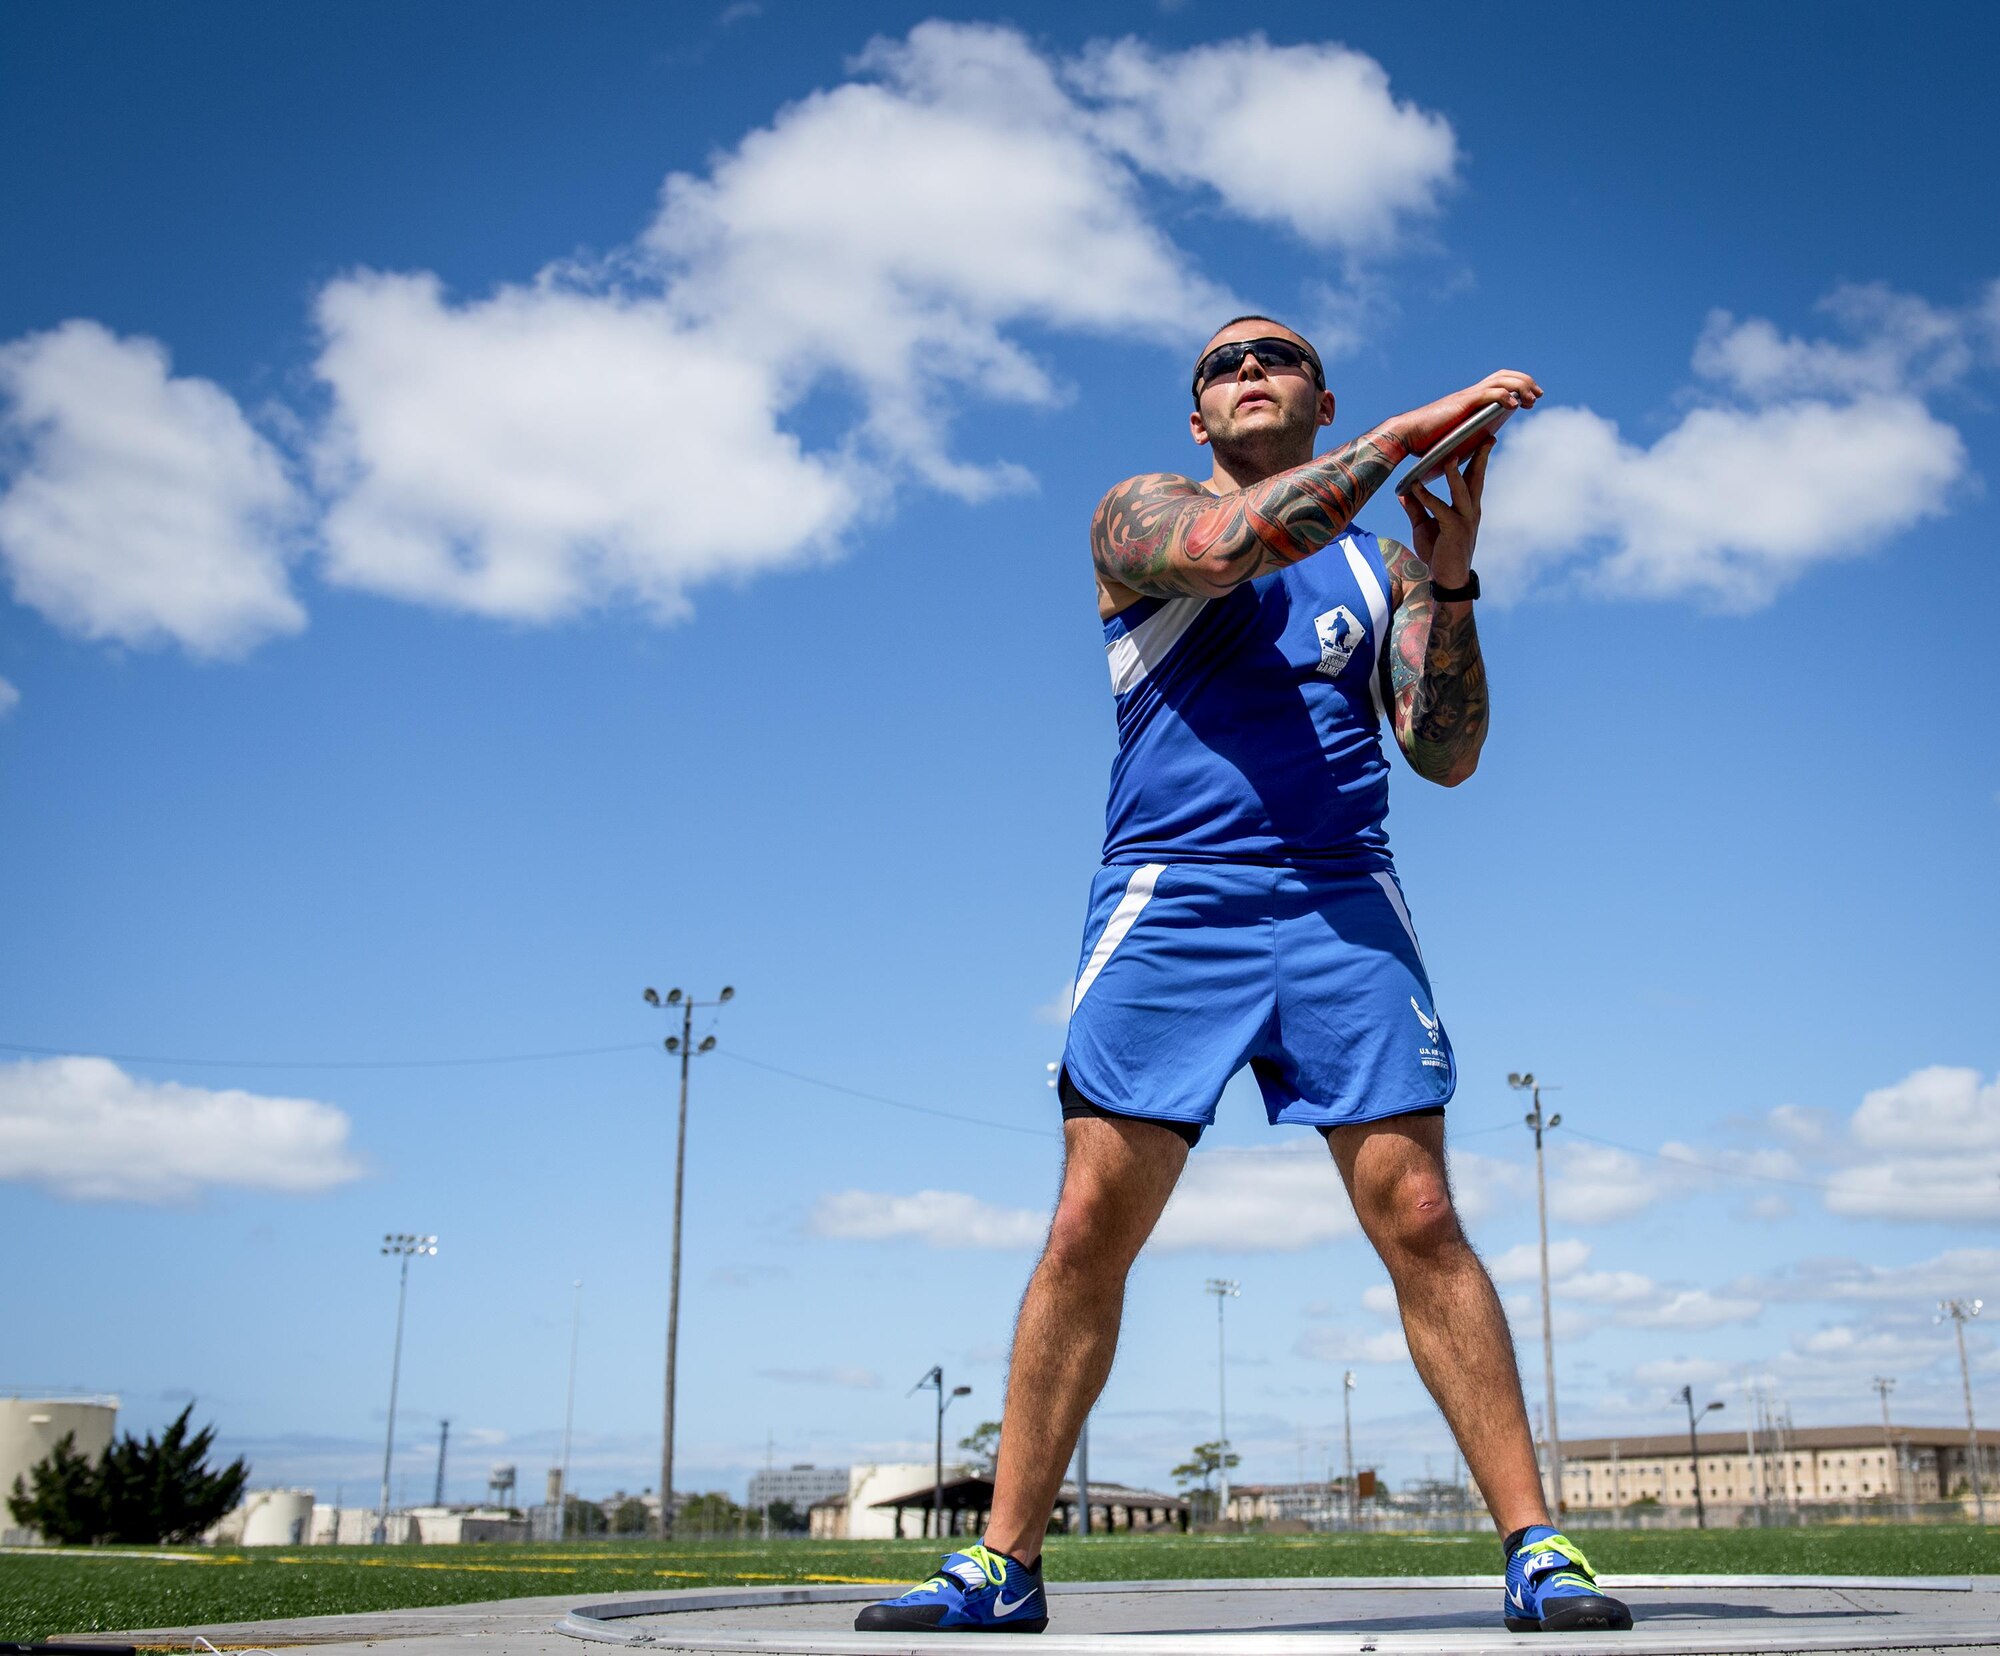 Rafael Morfin, a Warrior Games athlete, begins his discus rotation during a track and field session at the Air Force team’s training camp at Eglin Air Force Base, Fla., April 26. The base-hosted, week-long Warrior Games training camp is the last team practice session before the yearly competition in June. (U.S. Air Force photo/Samuel King Jr.)